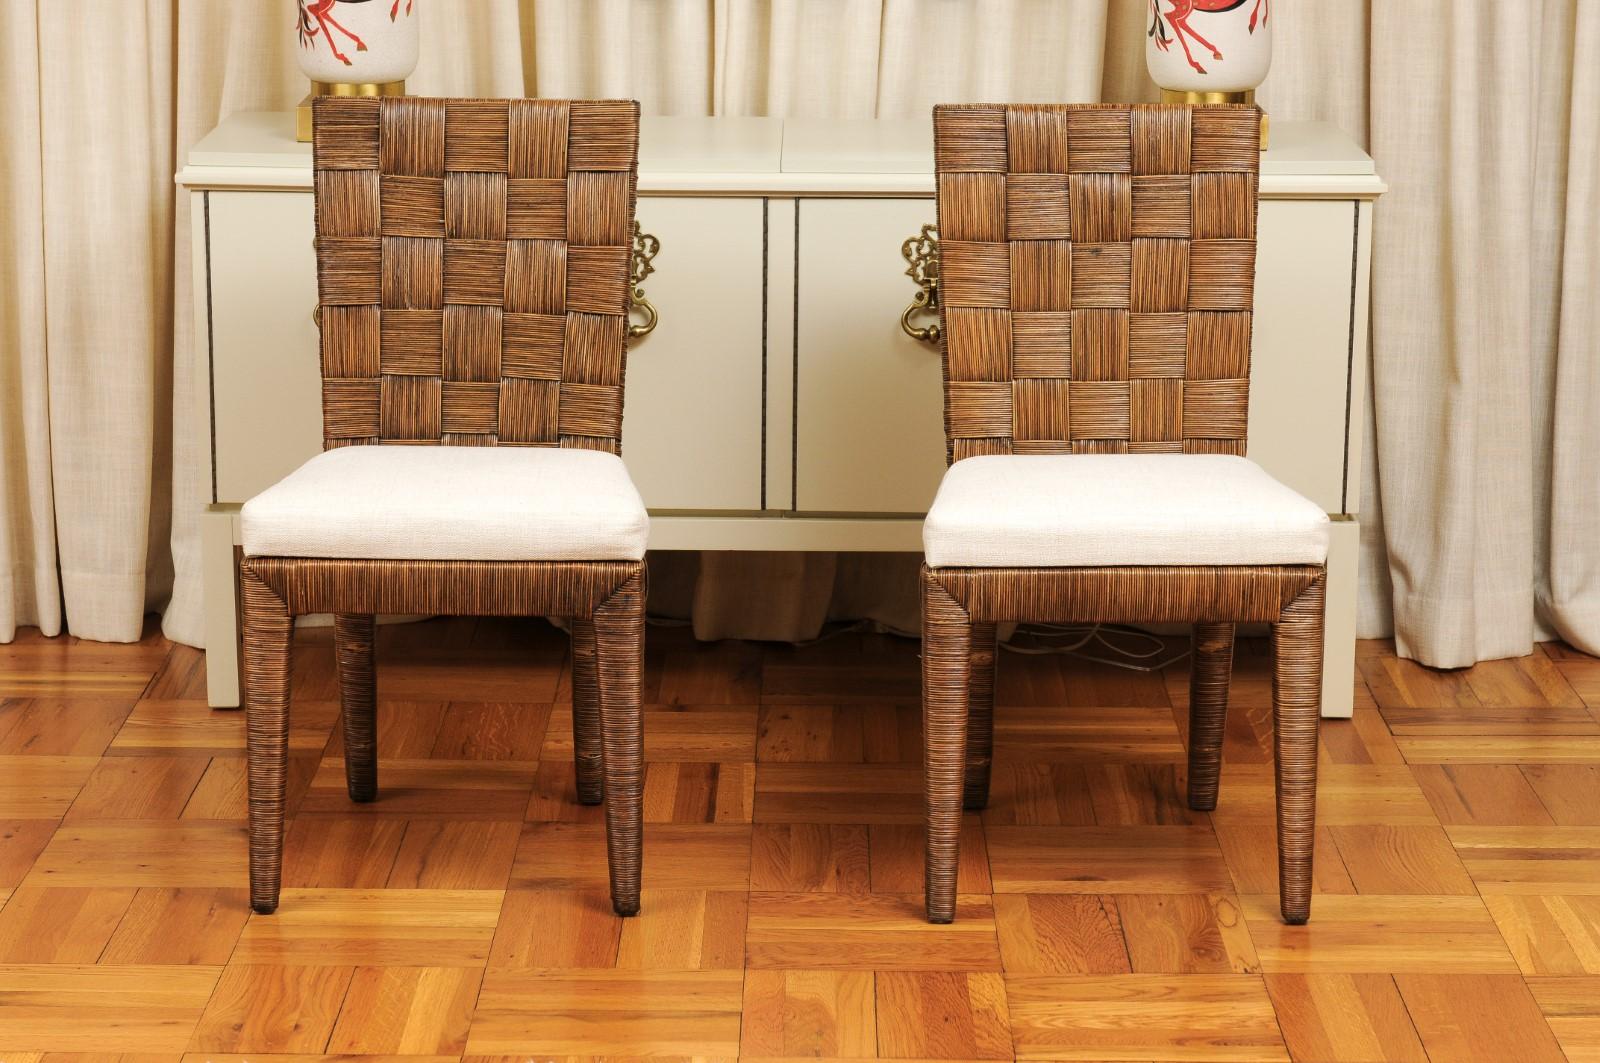 Stellar Restored Set of 16 Block Island Cane Chairs by John Hutton for Donghia For Sale 3